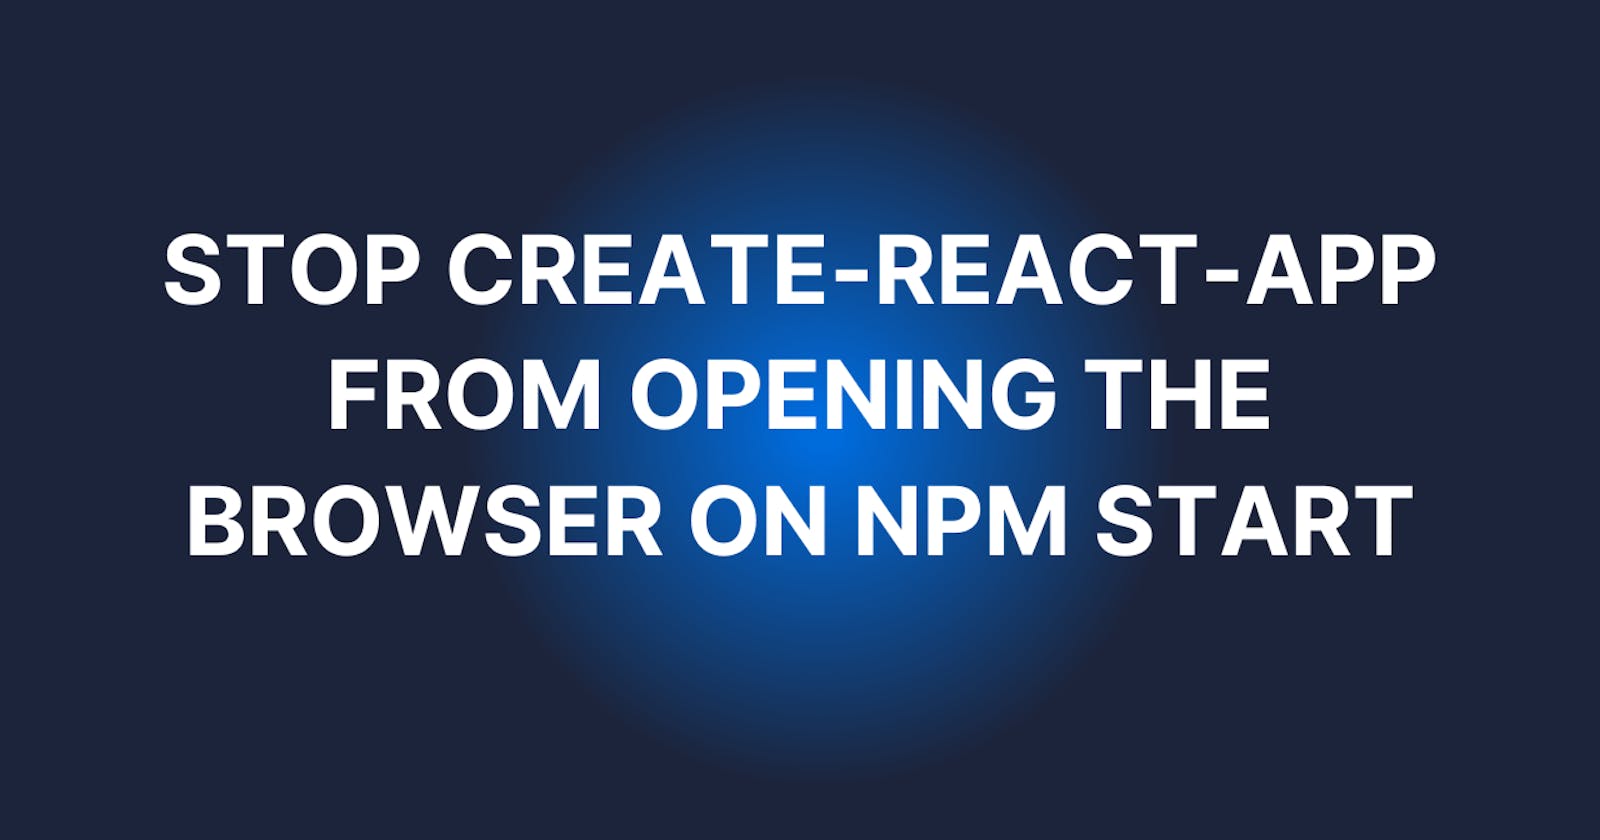 Stop Create-React-App from opening the browser on npm start